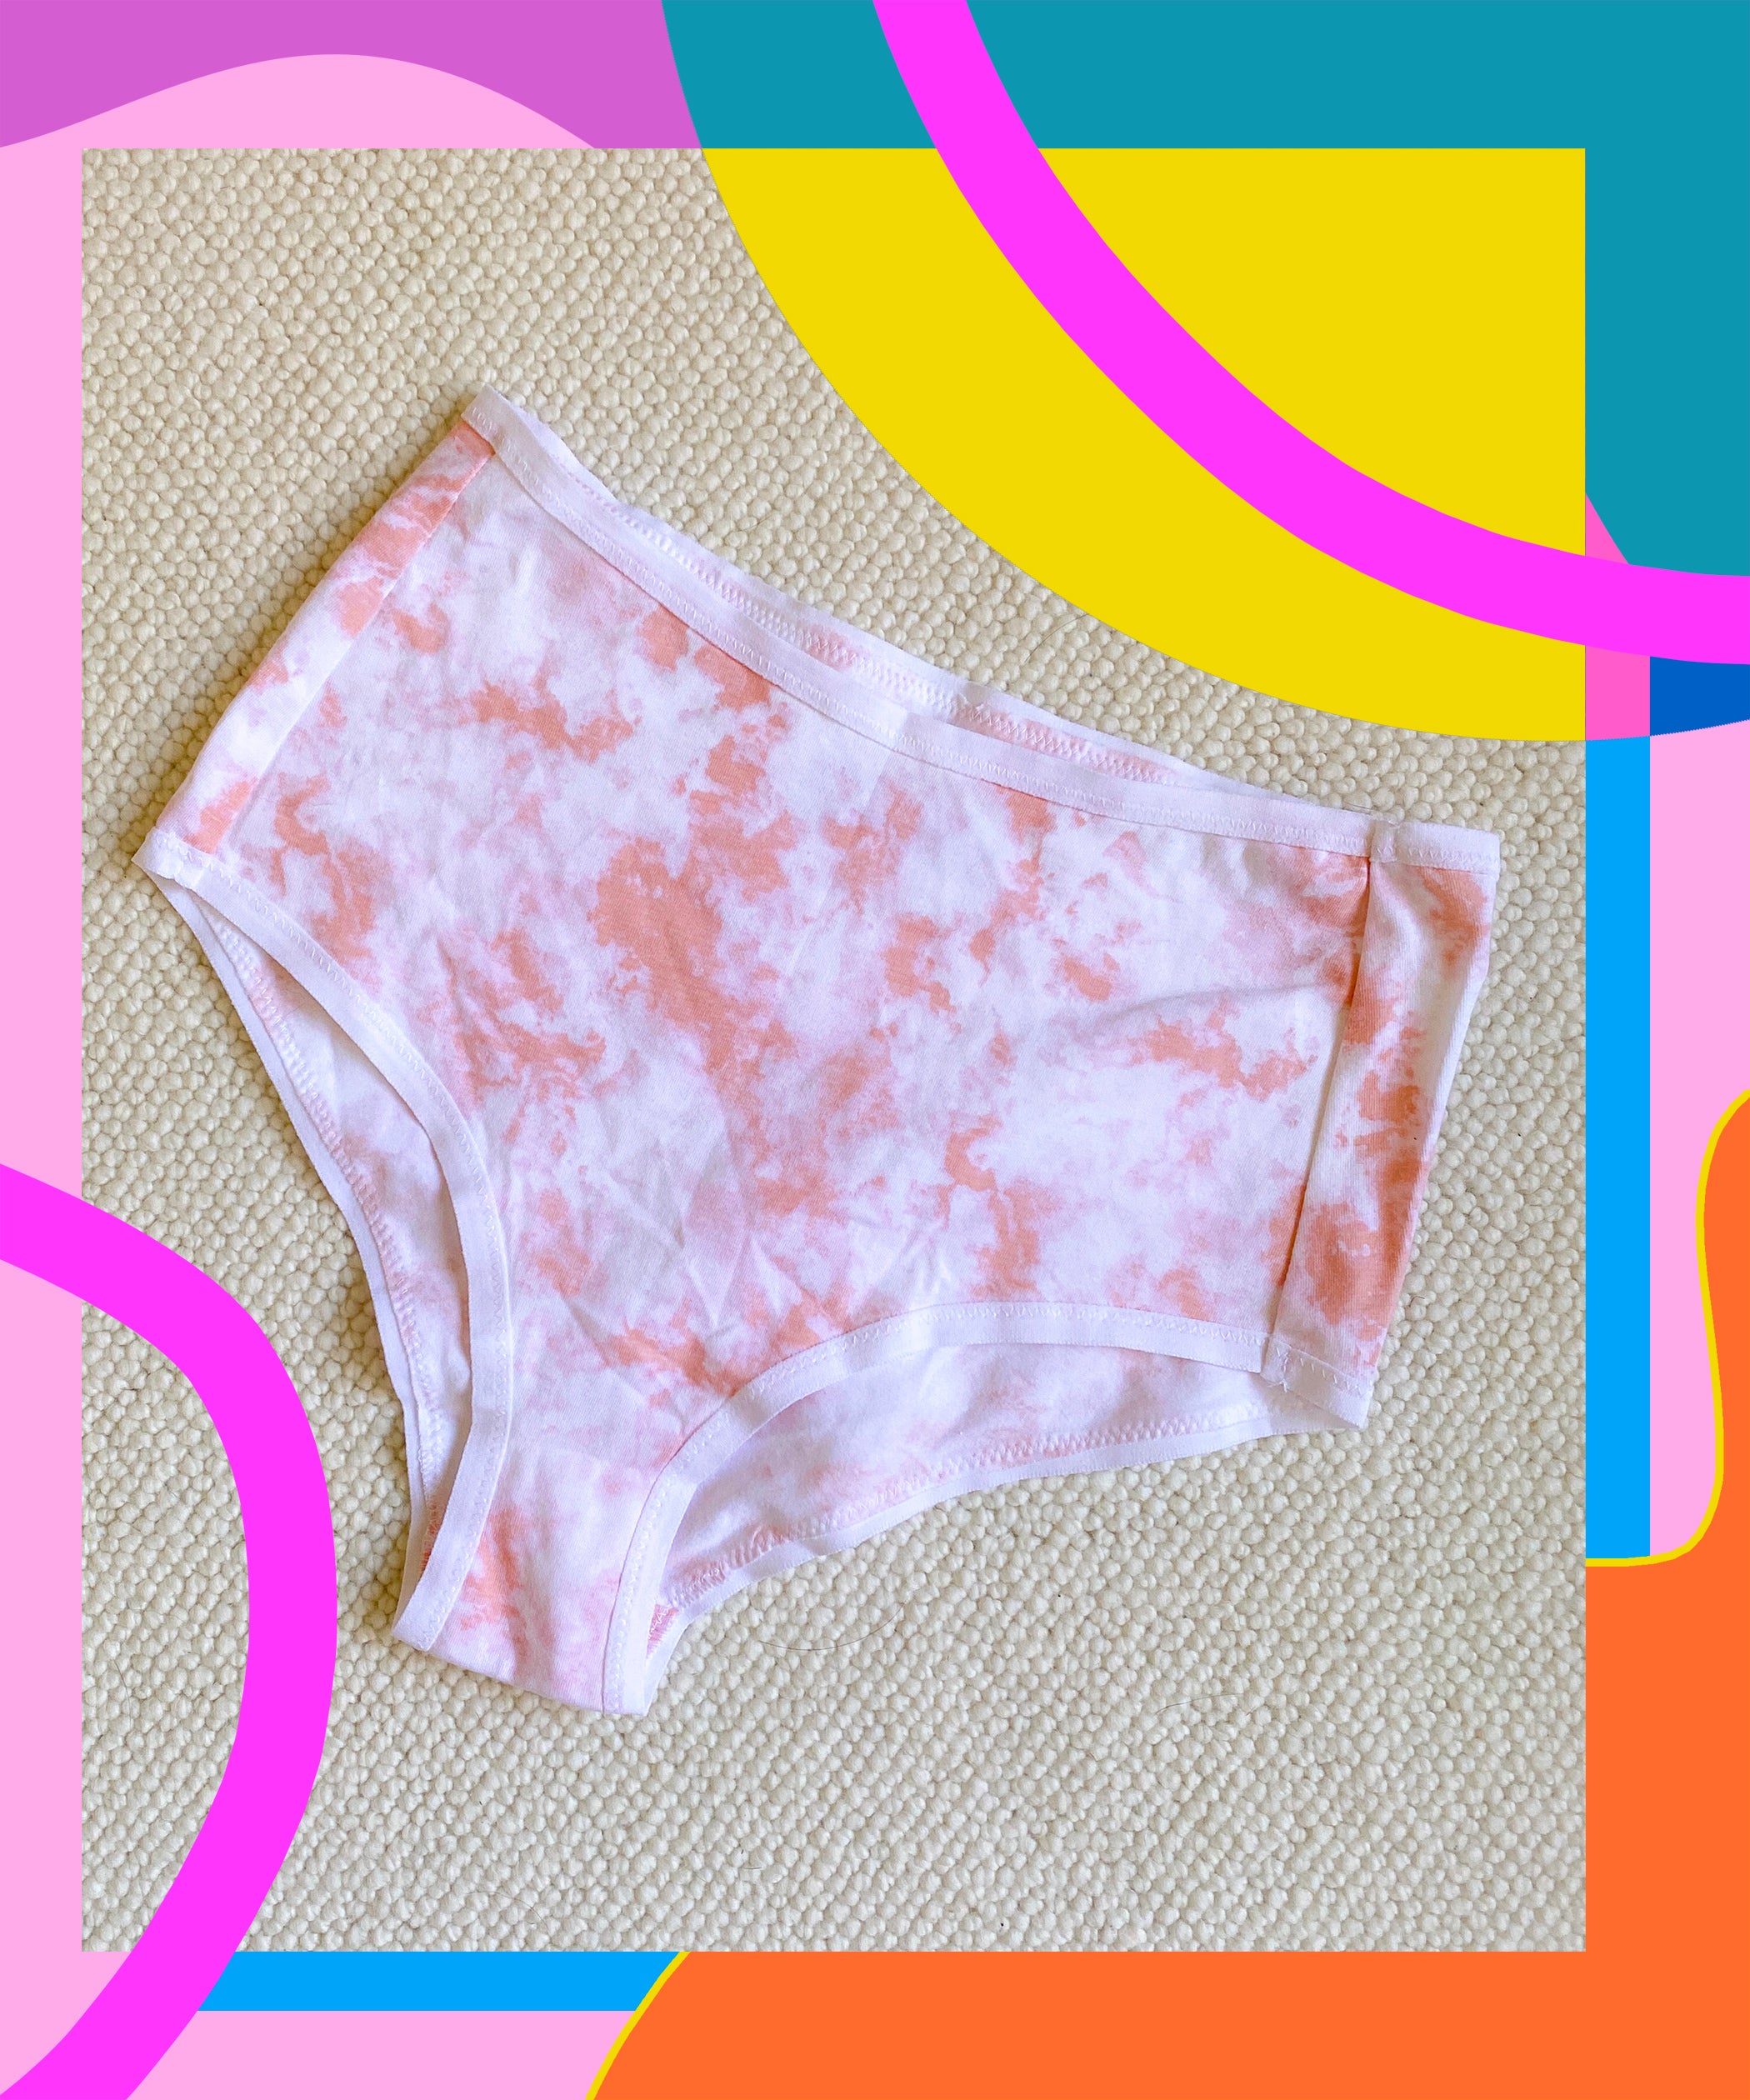 Unsponsored PACT Organic Cotton Underwear Review {Updated July 2020} —  Fairly Curated